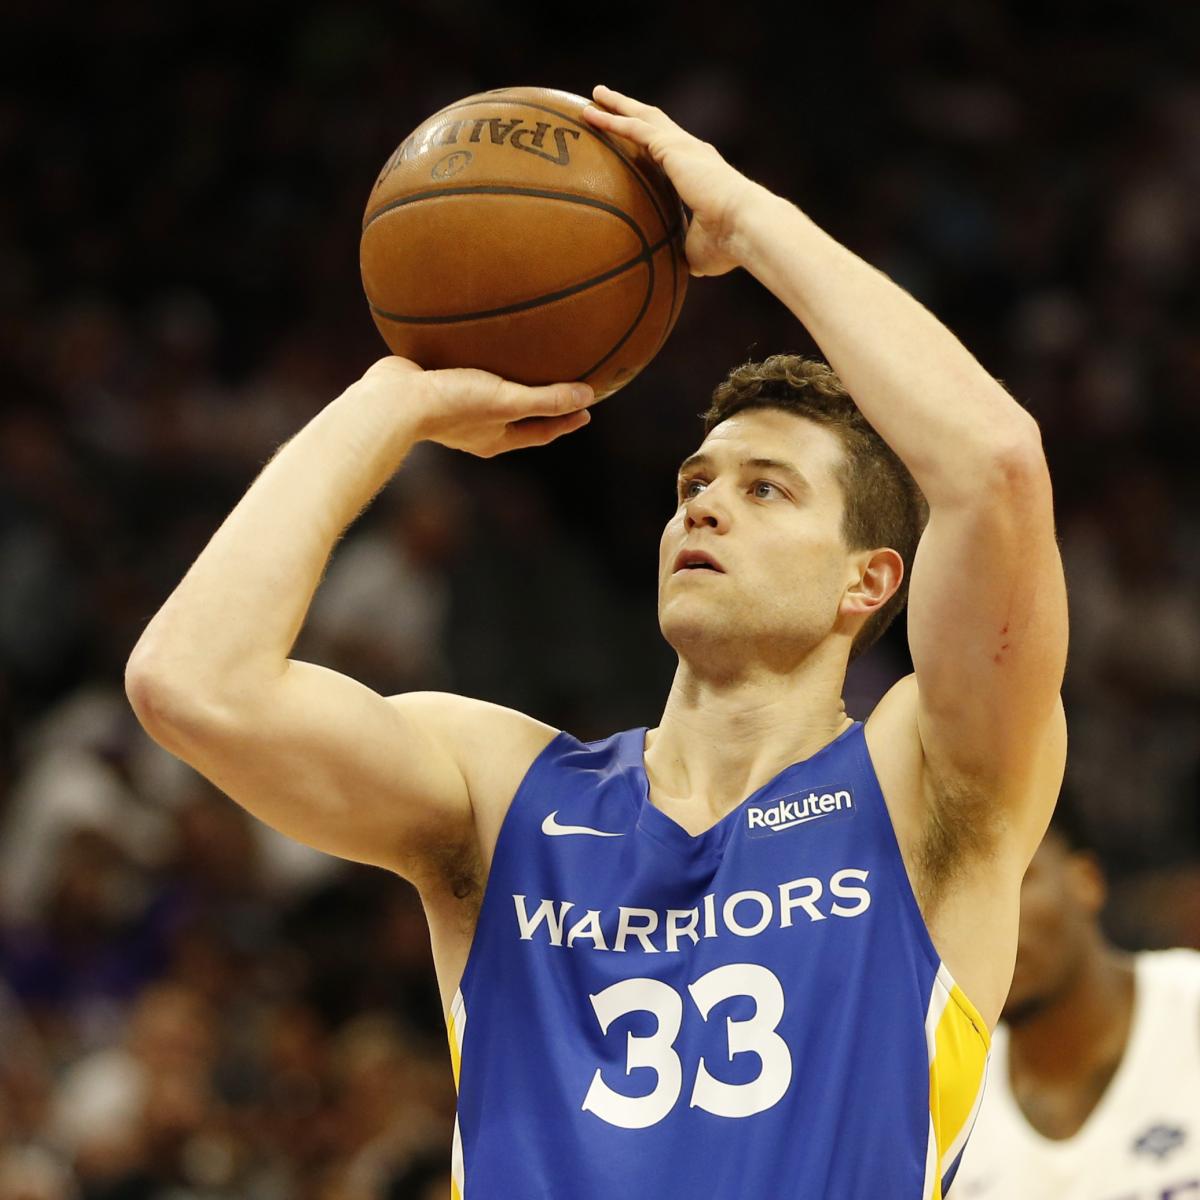 Jimmer Fredette: Bio, Contract, & Stats